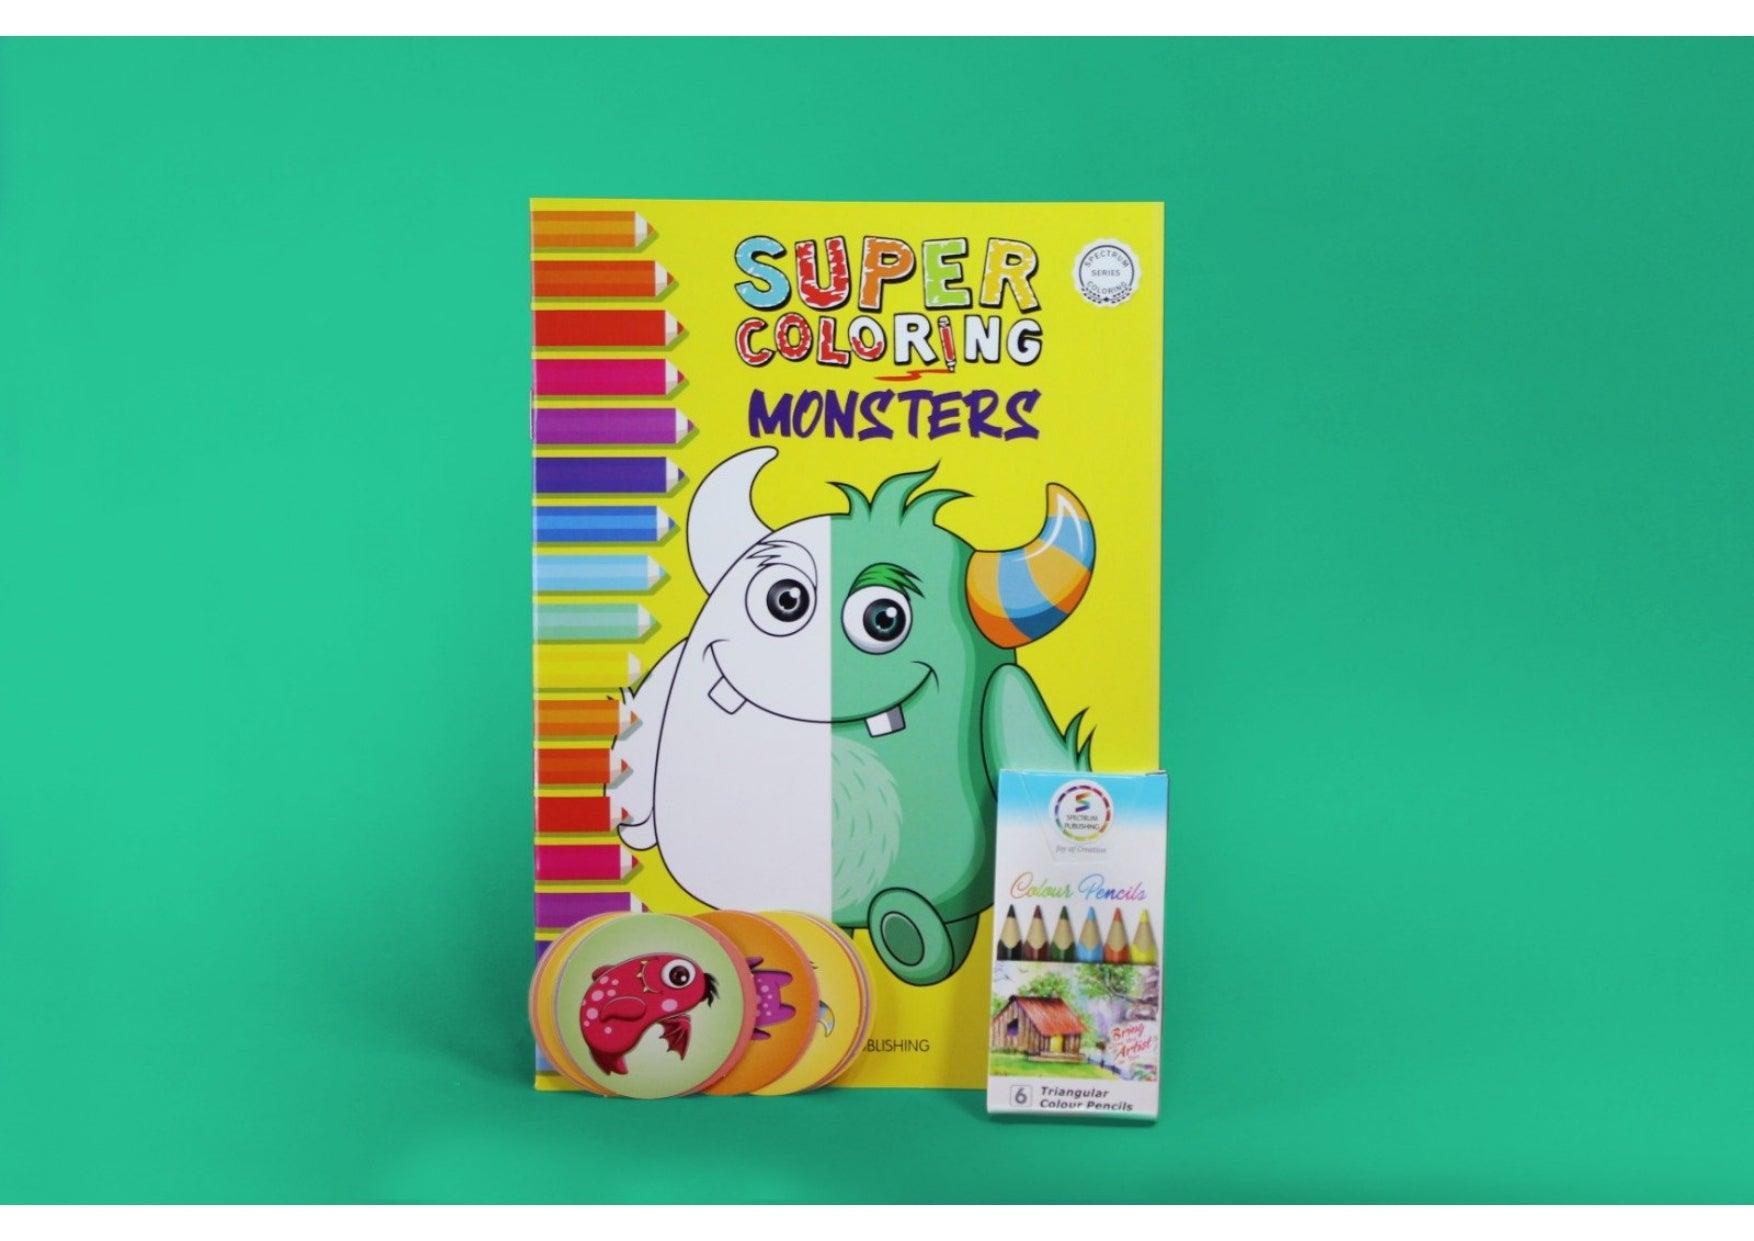 Super coloring monsters book - Ourkids - Spectrum Publishing